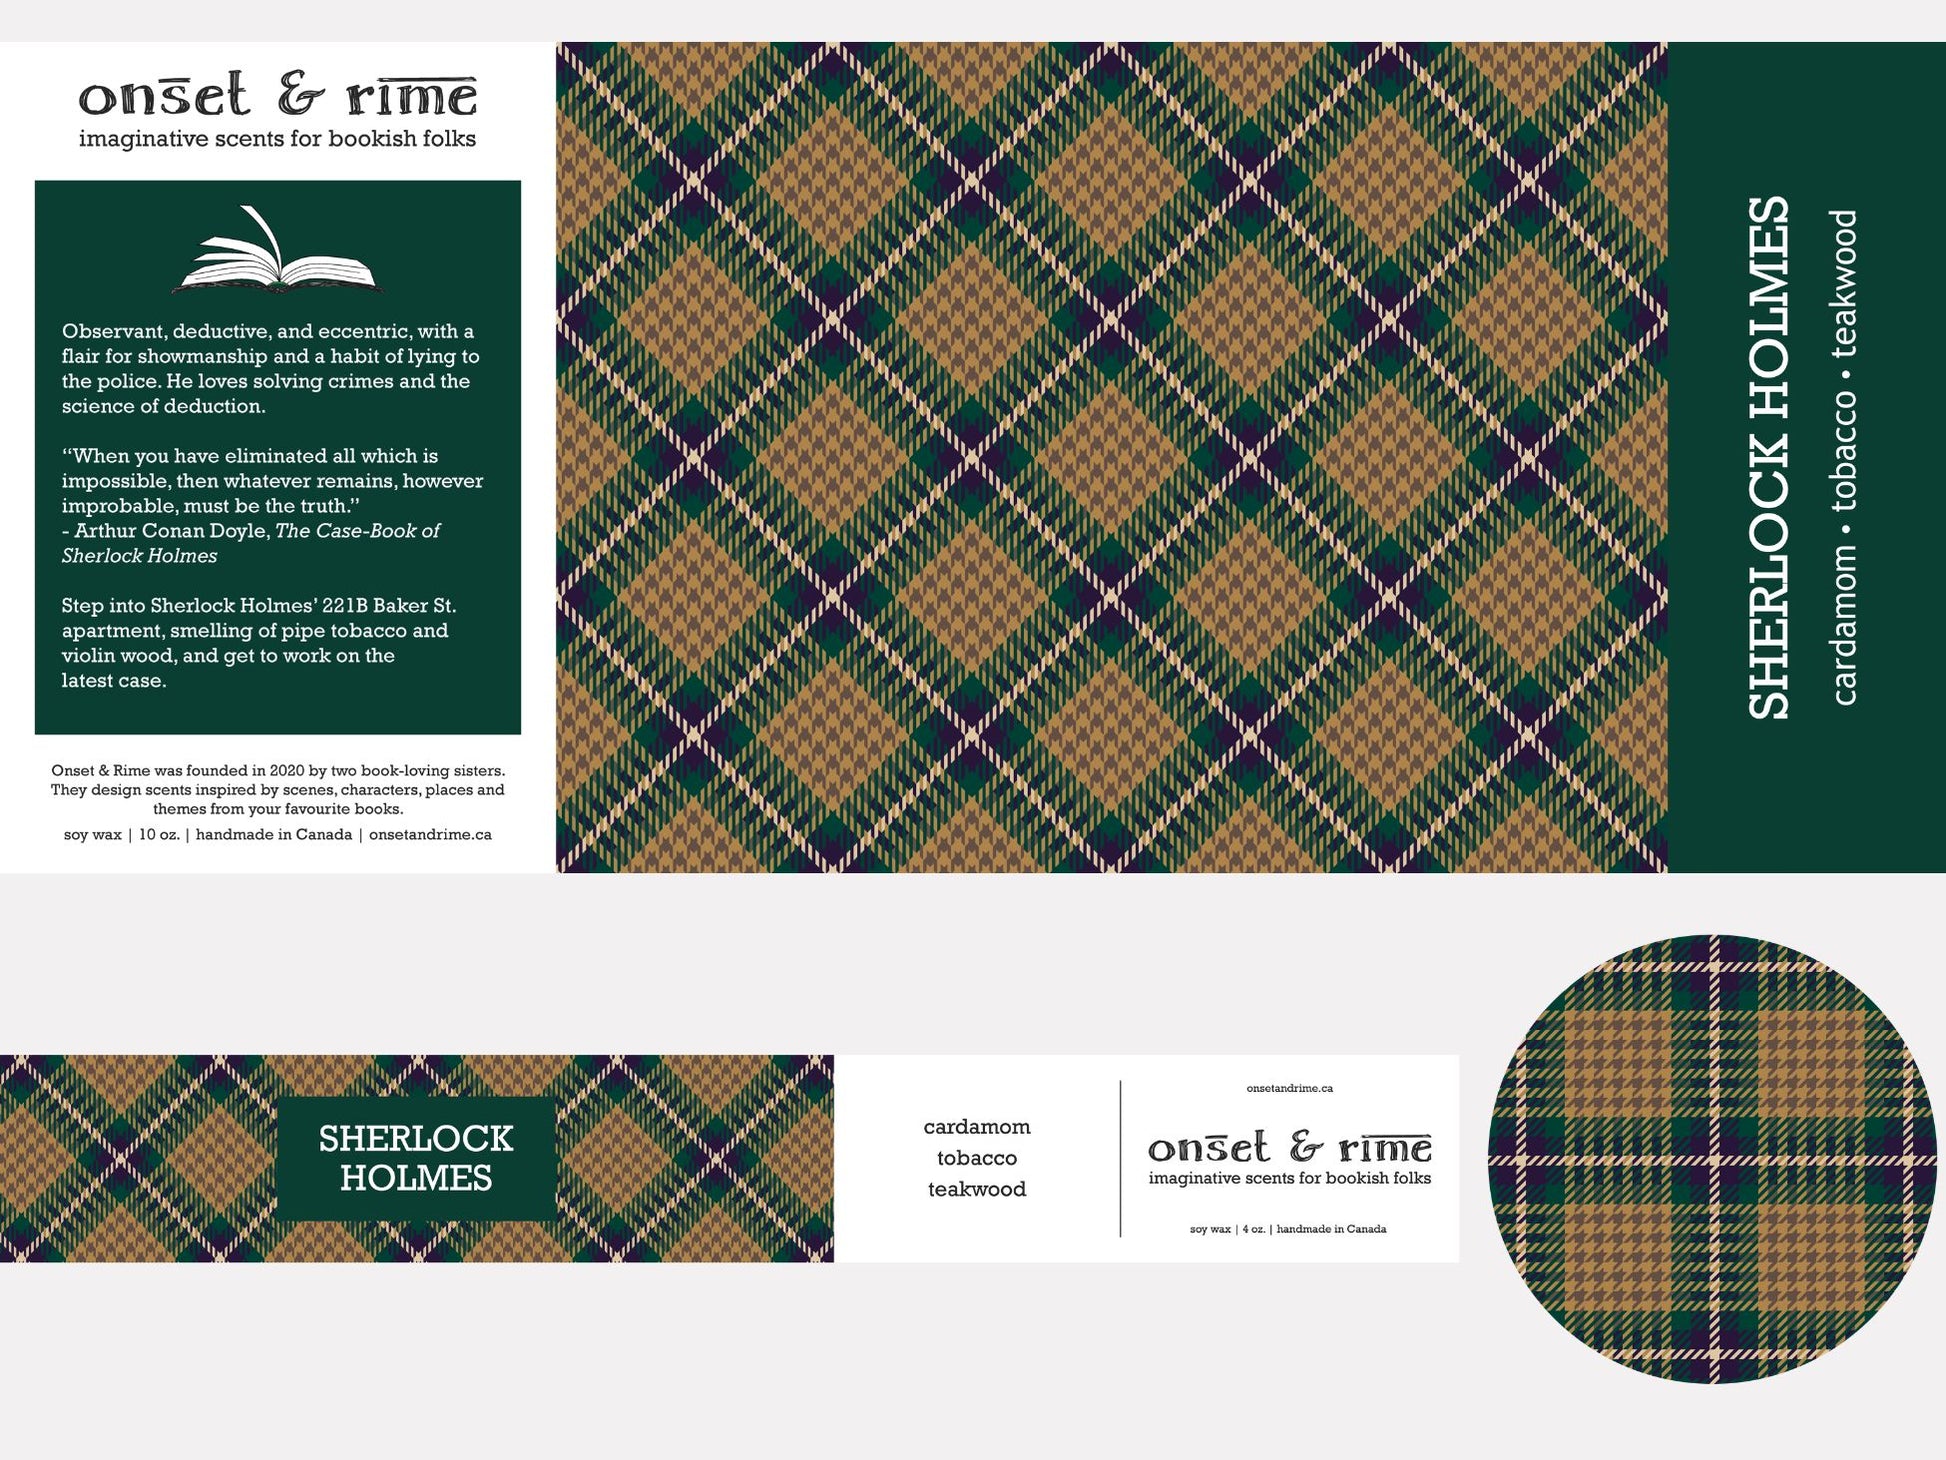 A close up view of the label for the Onset & Rime woody tobacco scented candle called "Sherlock Holmes". The label is a gold and green plaid pattern. The text on the label is "Sherlock Holmes - Cardamom, Tobacco, Teakwood".